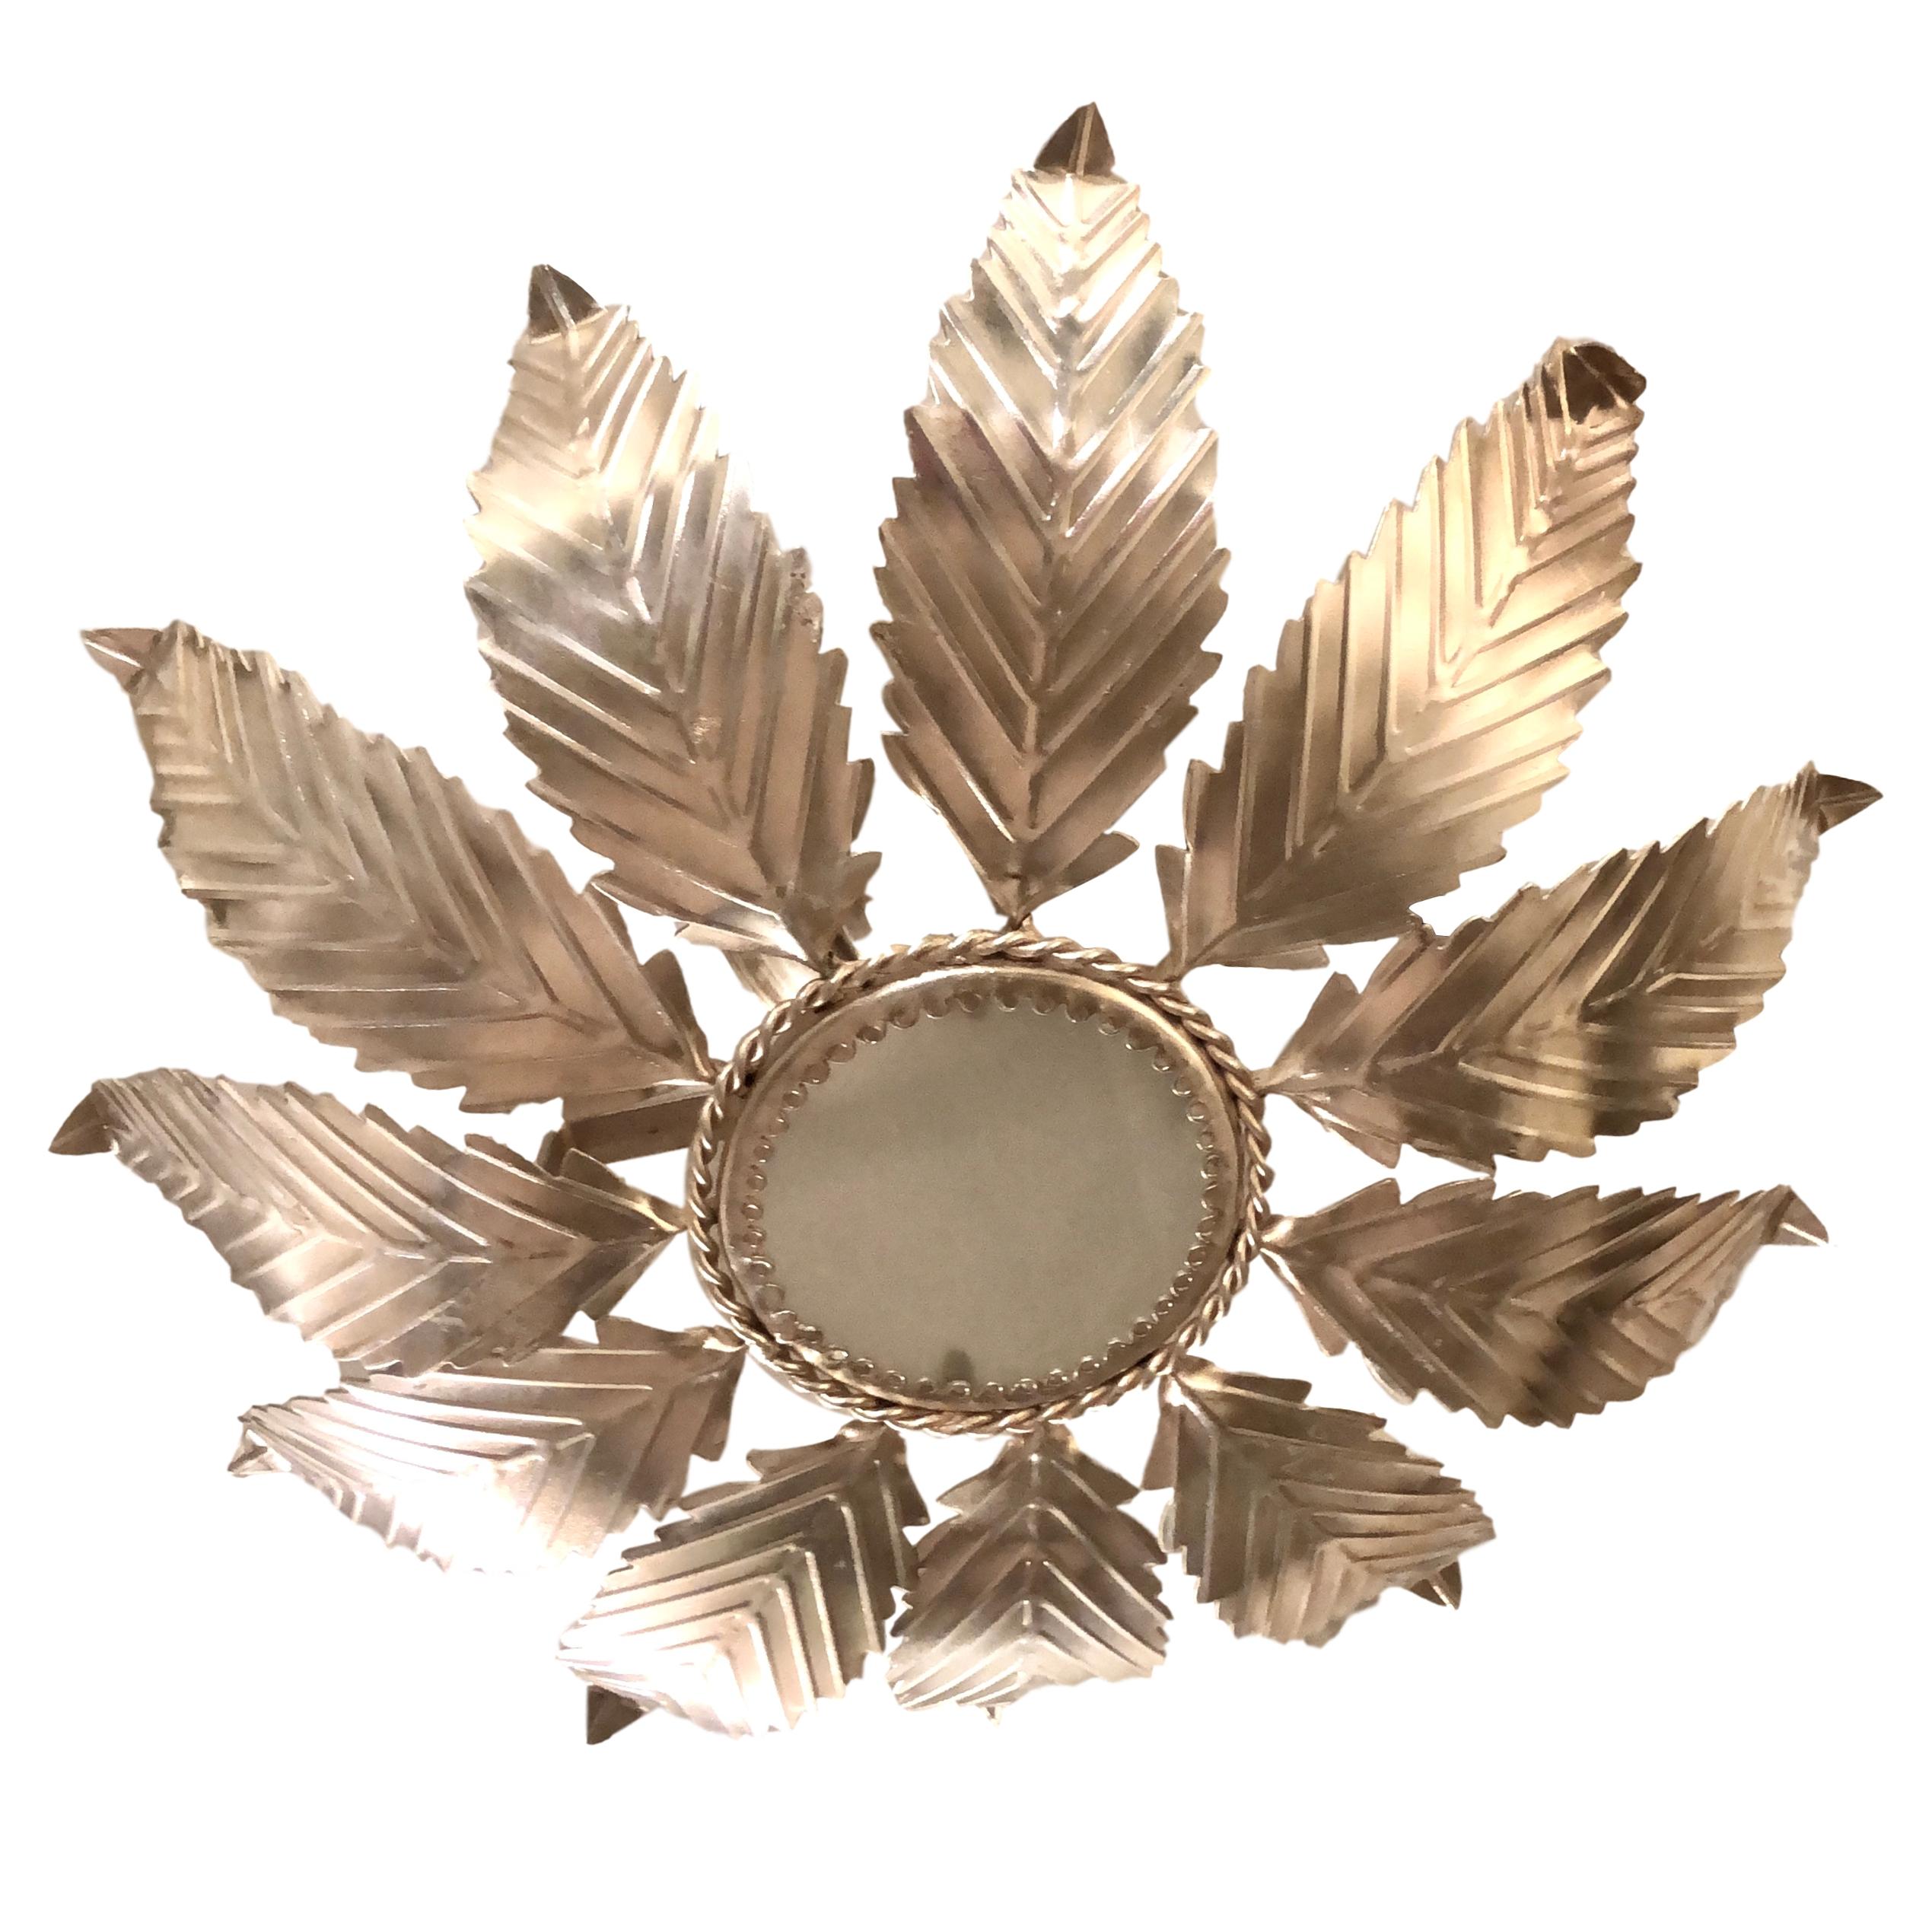 Pair of 1940's silver plated light fixtures with foliage motif. Sold individually.

Measurements: 
Drop: 7